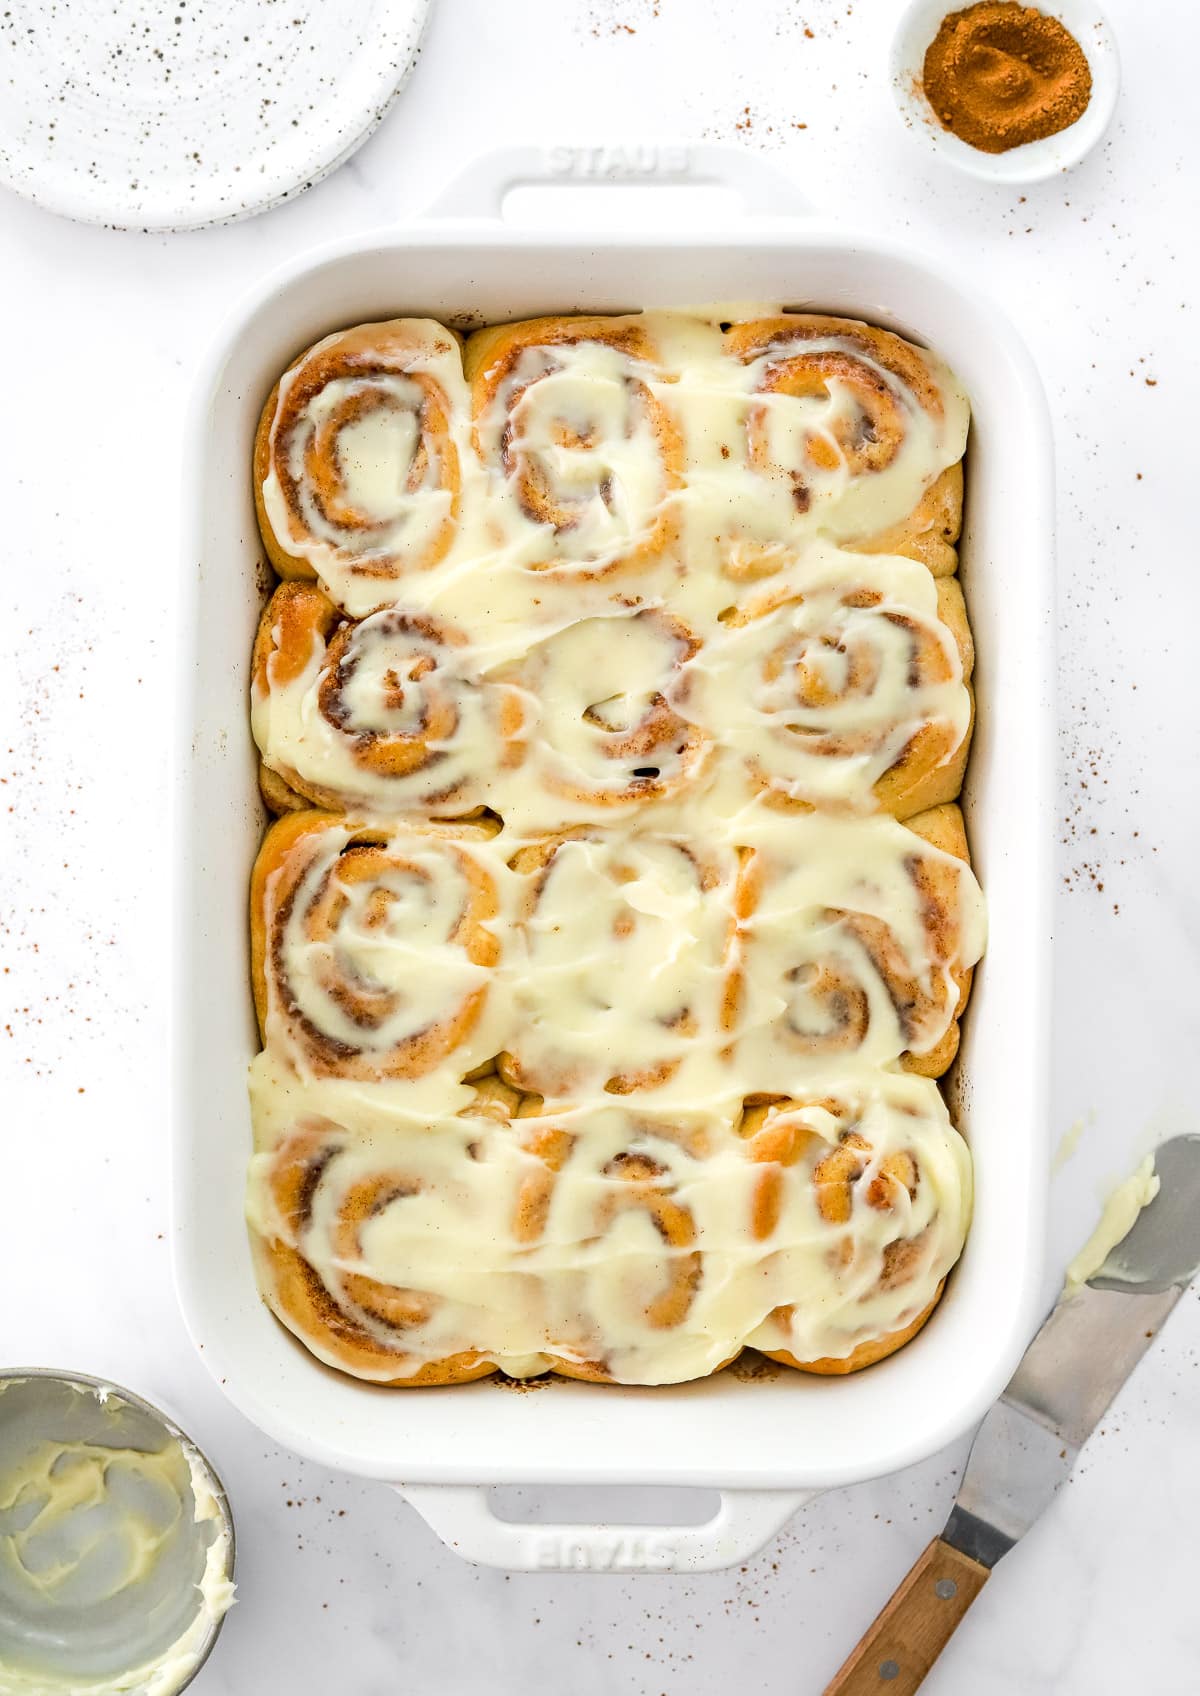 Twelve healthy cinnamon rolls with cream cheese frosting in white baking dish.